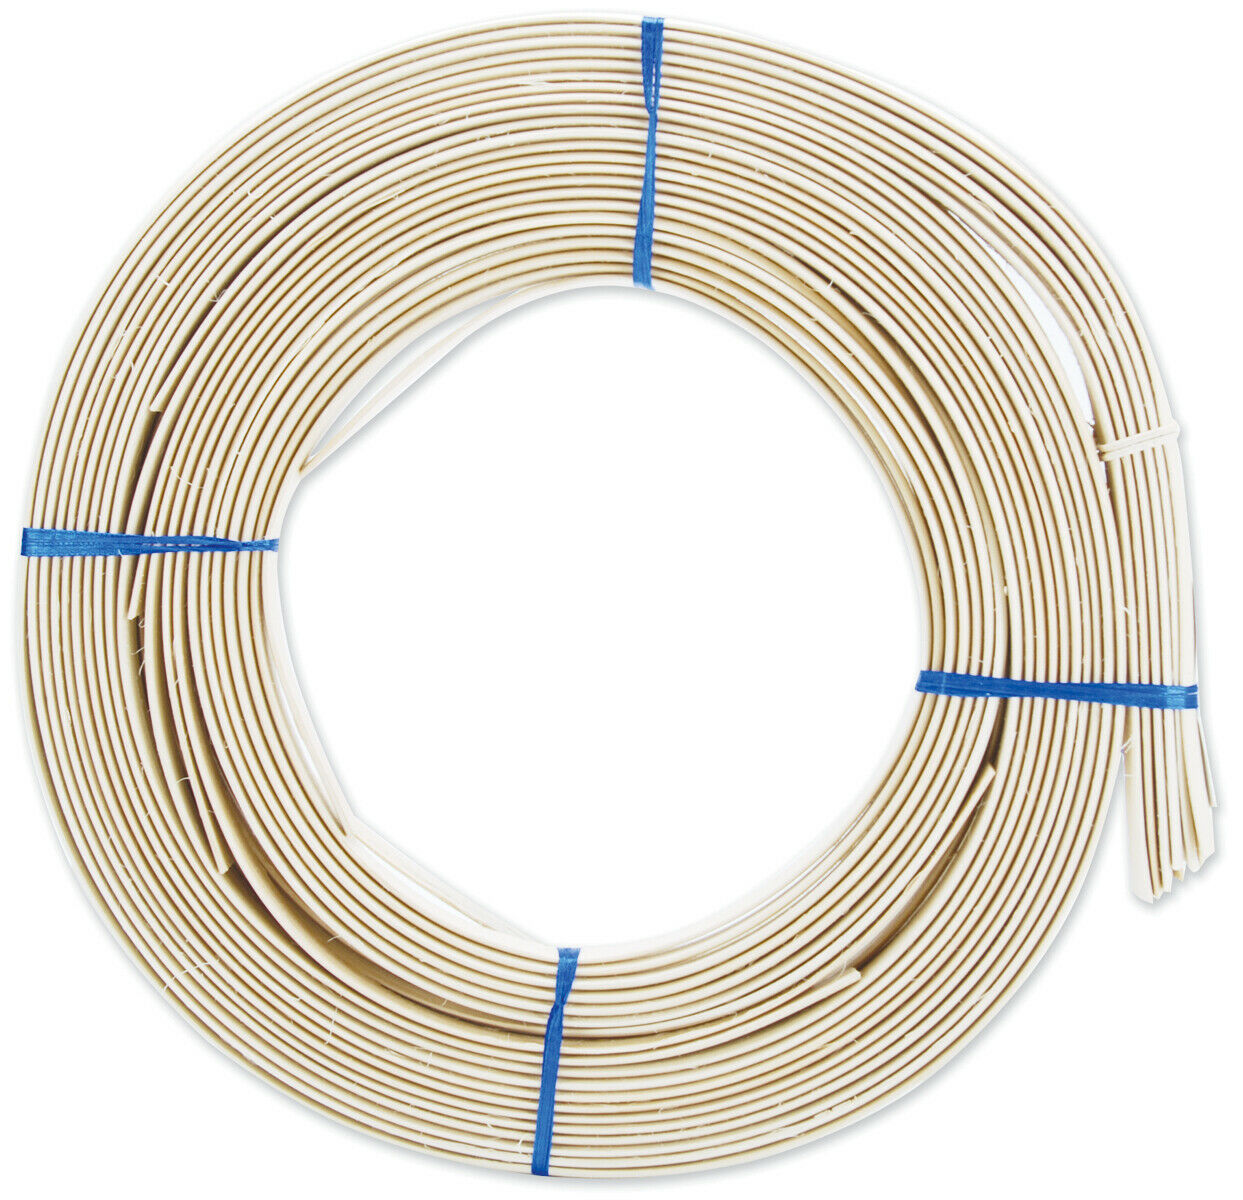 Commonwealth Basket Flat Oval Reed 12.7mm 1lb Coil-approximately 90'